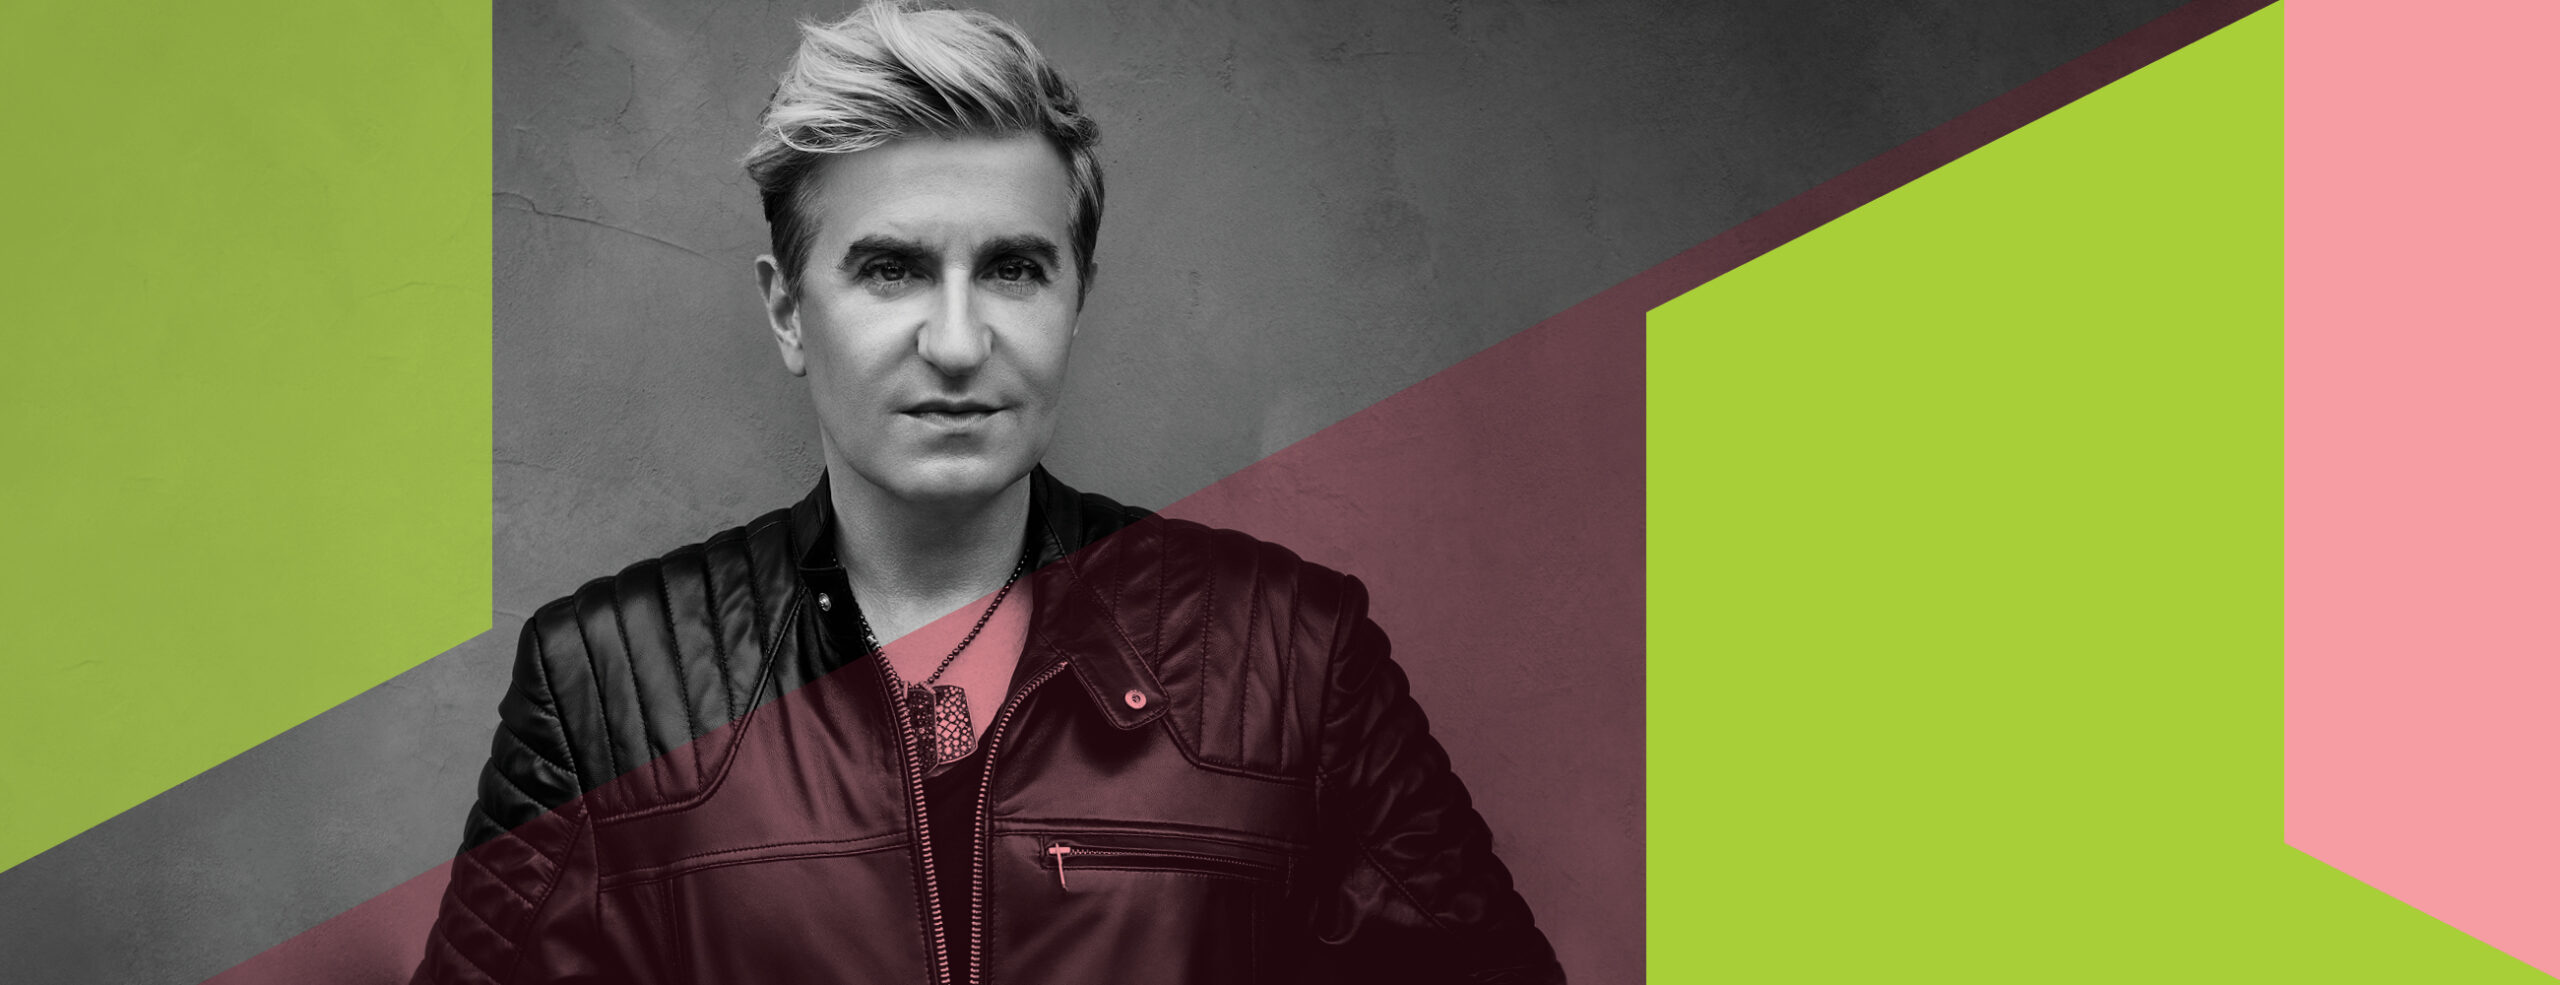 Jea-Yves Thibaudet with green and pink graphic overlay